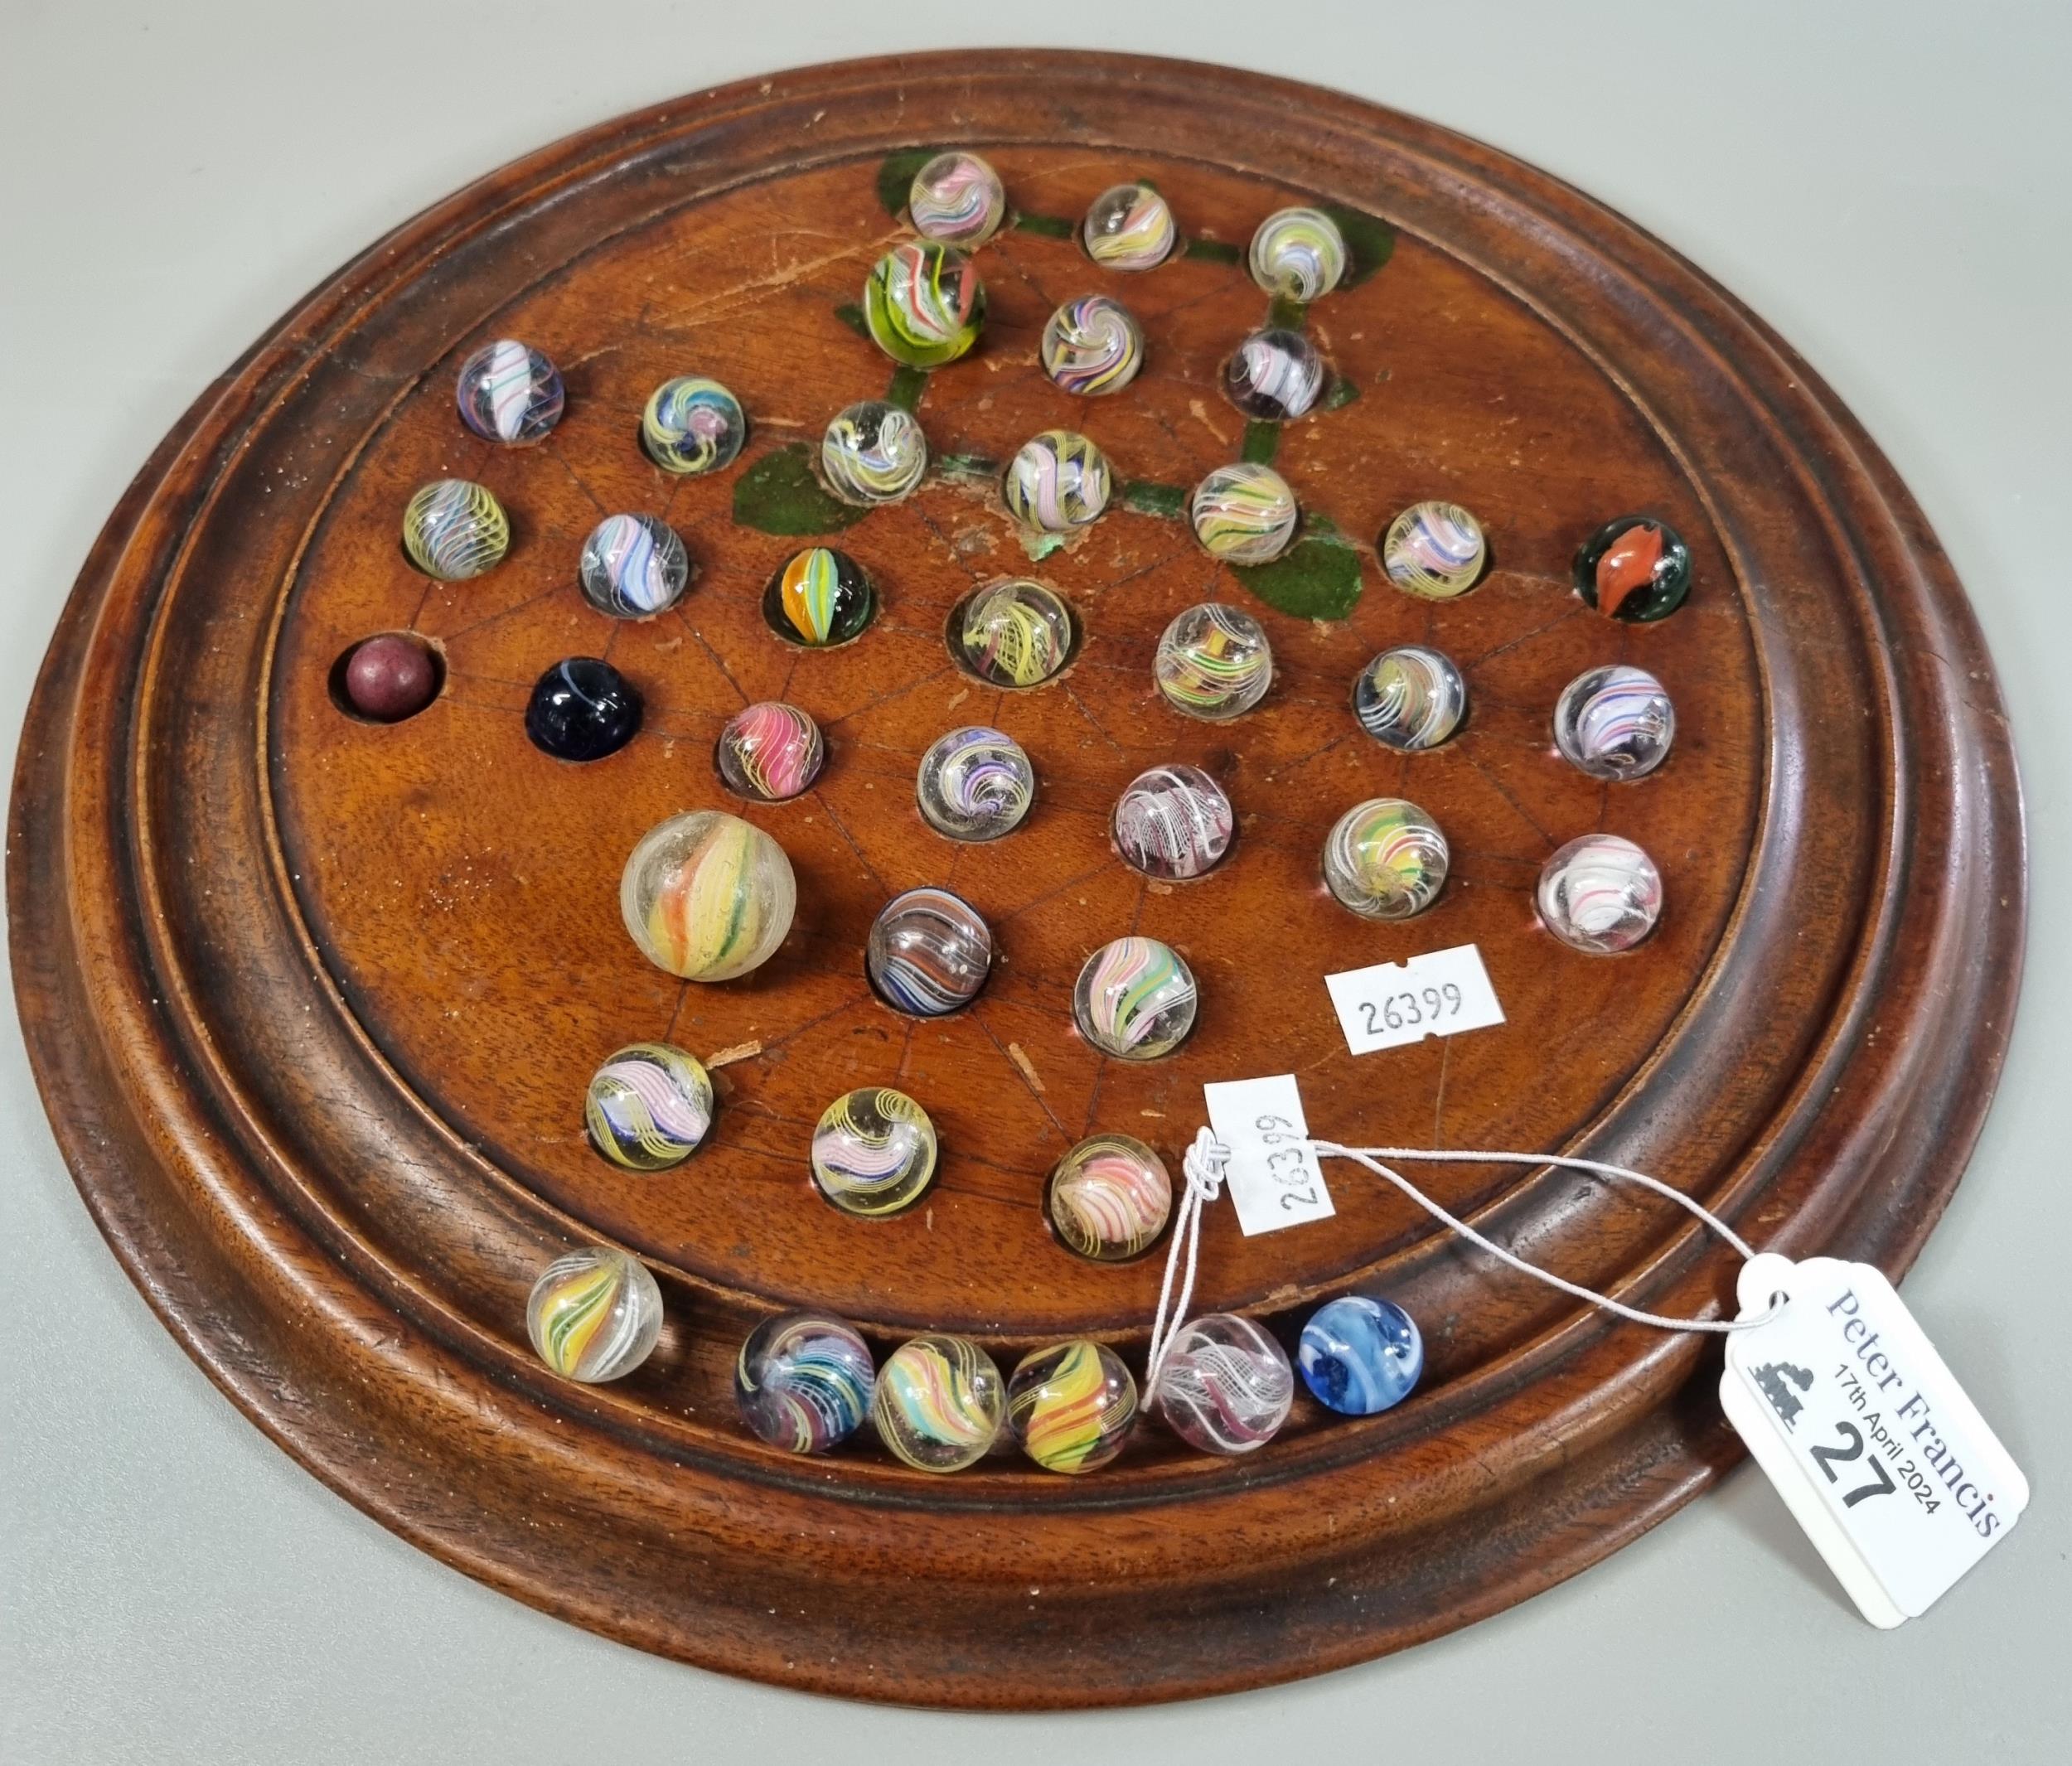 Turned wooden Solitaire board with a collection of mainly Victorian glass marbles. (B.P. 21% + VAT)